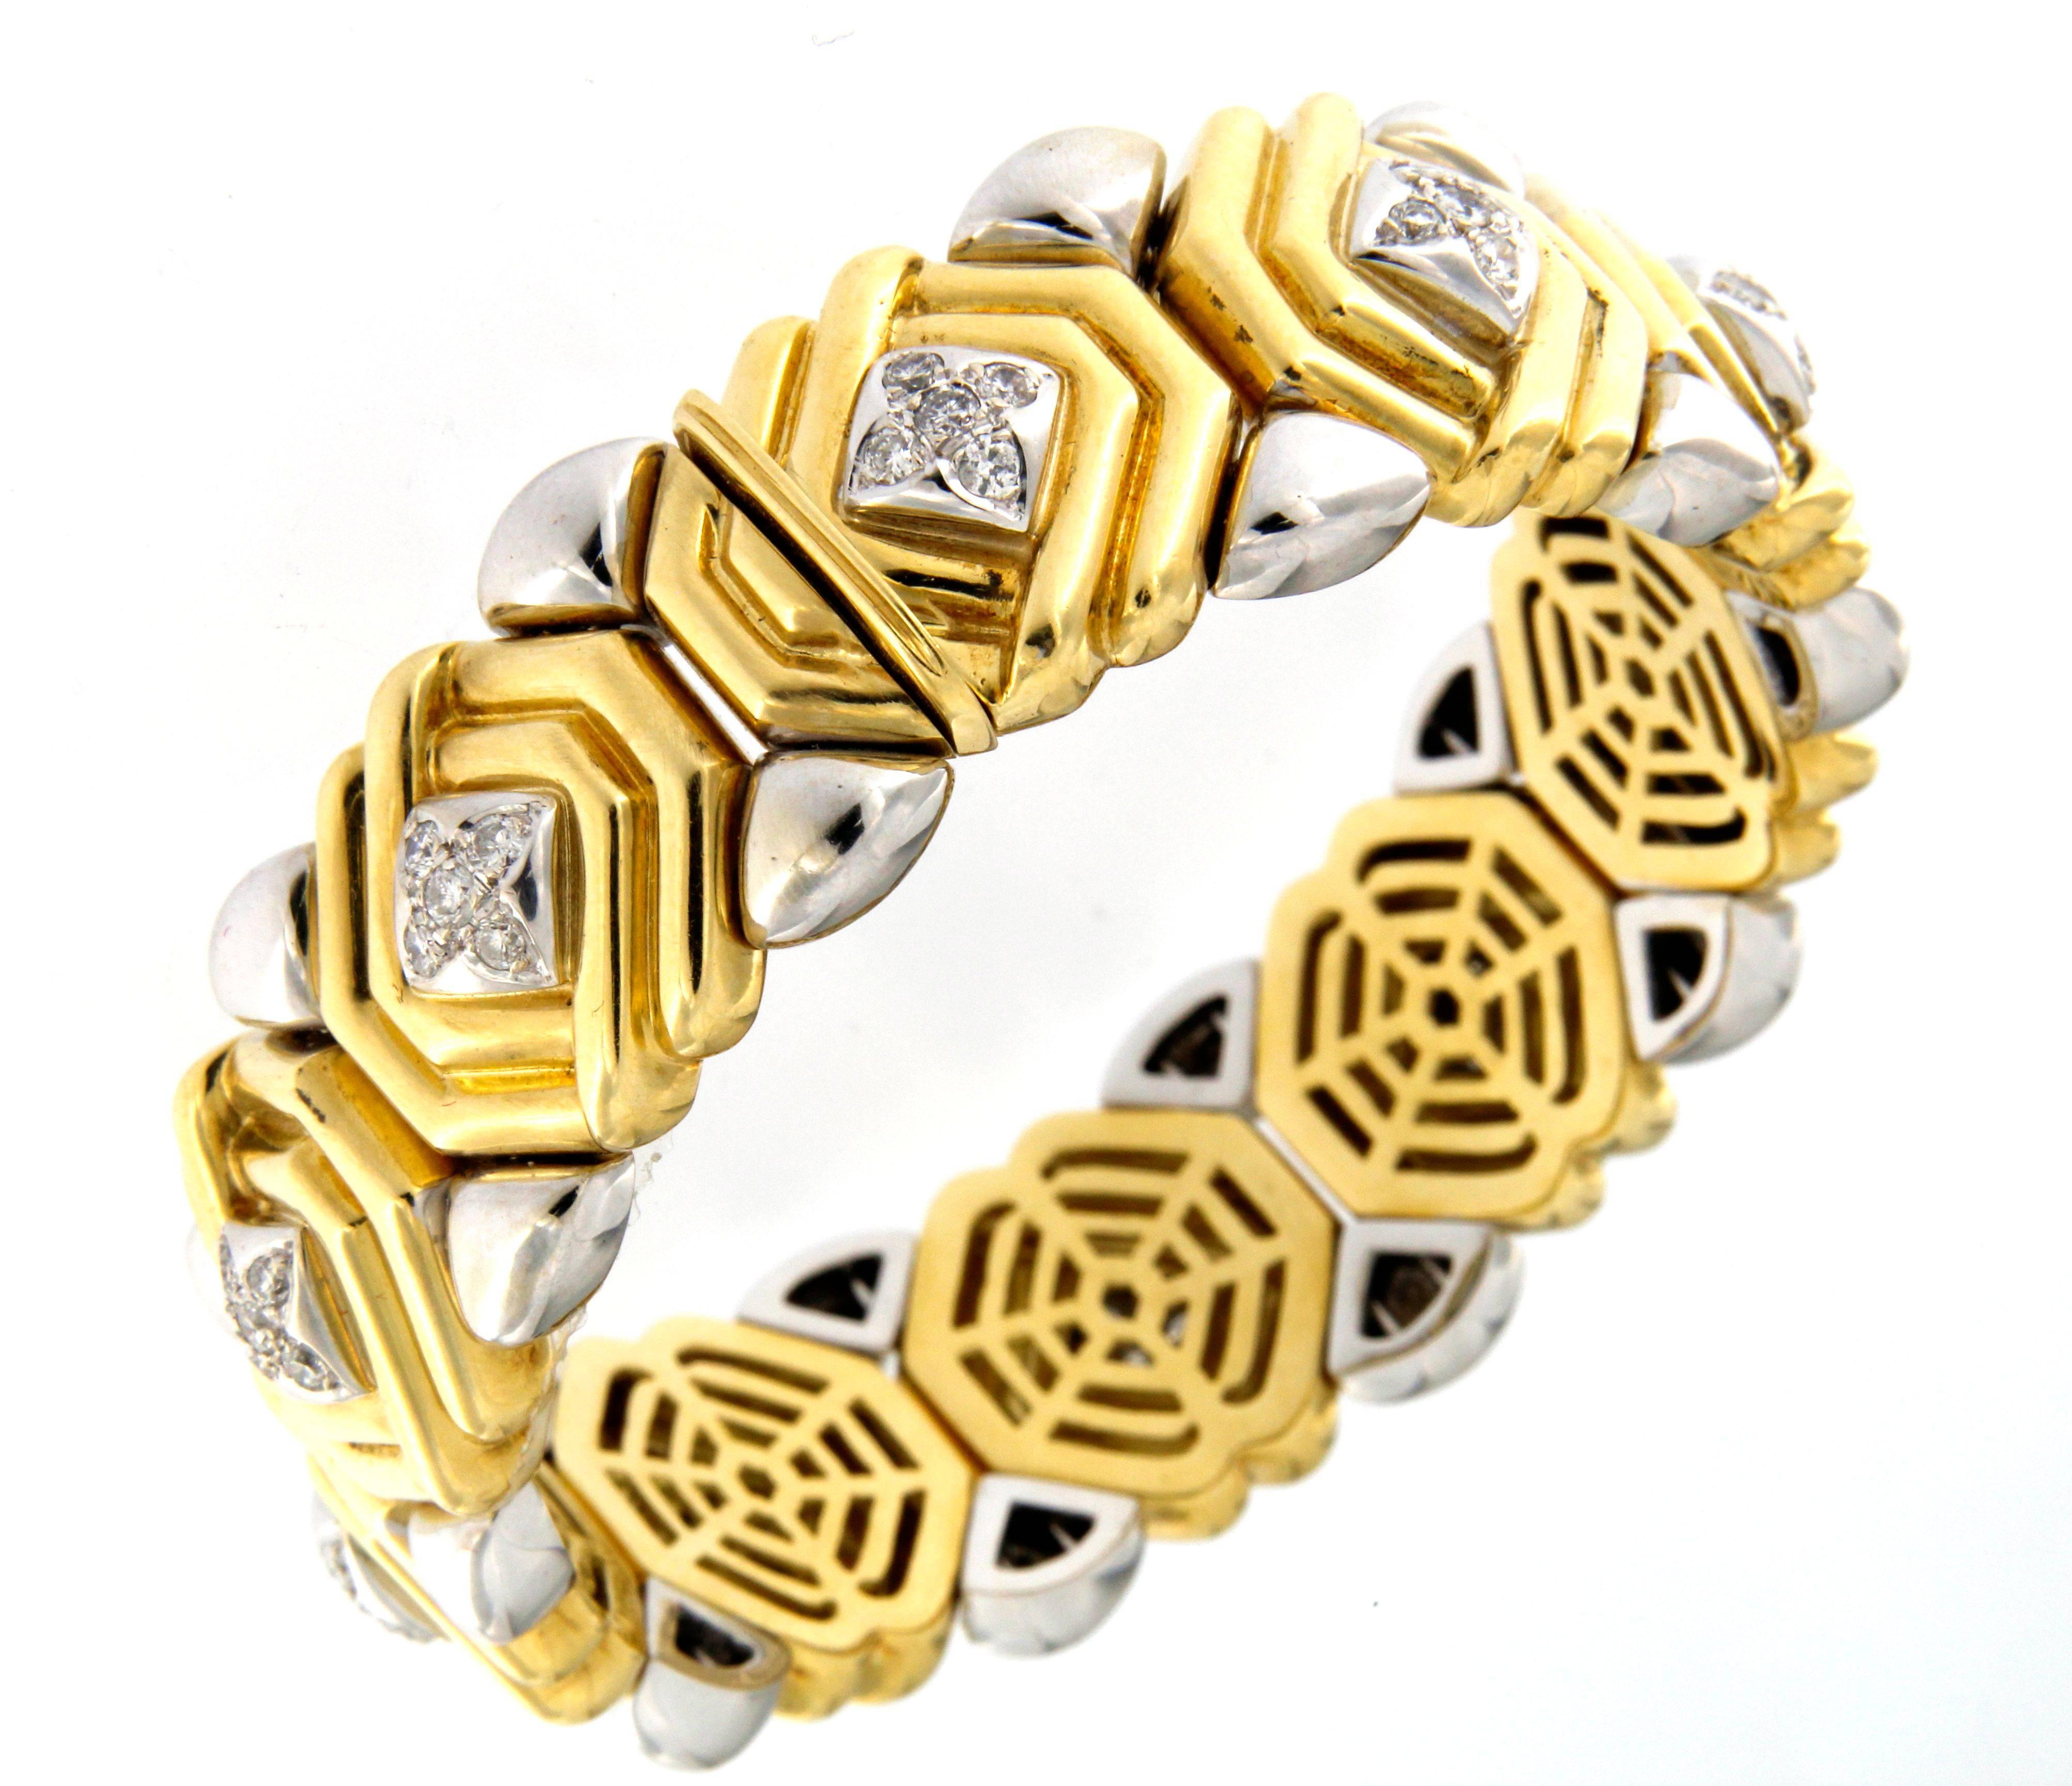 excellent condition, white and yellow gold 18 kt, set with full round cut diamonds , color H clarity Vs/Si